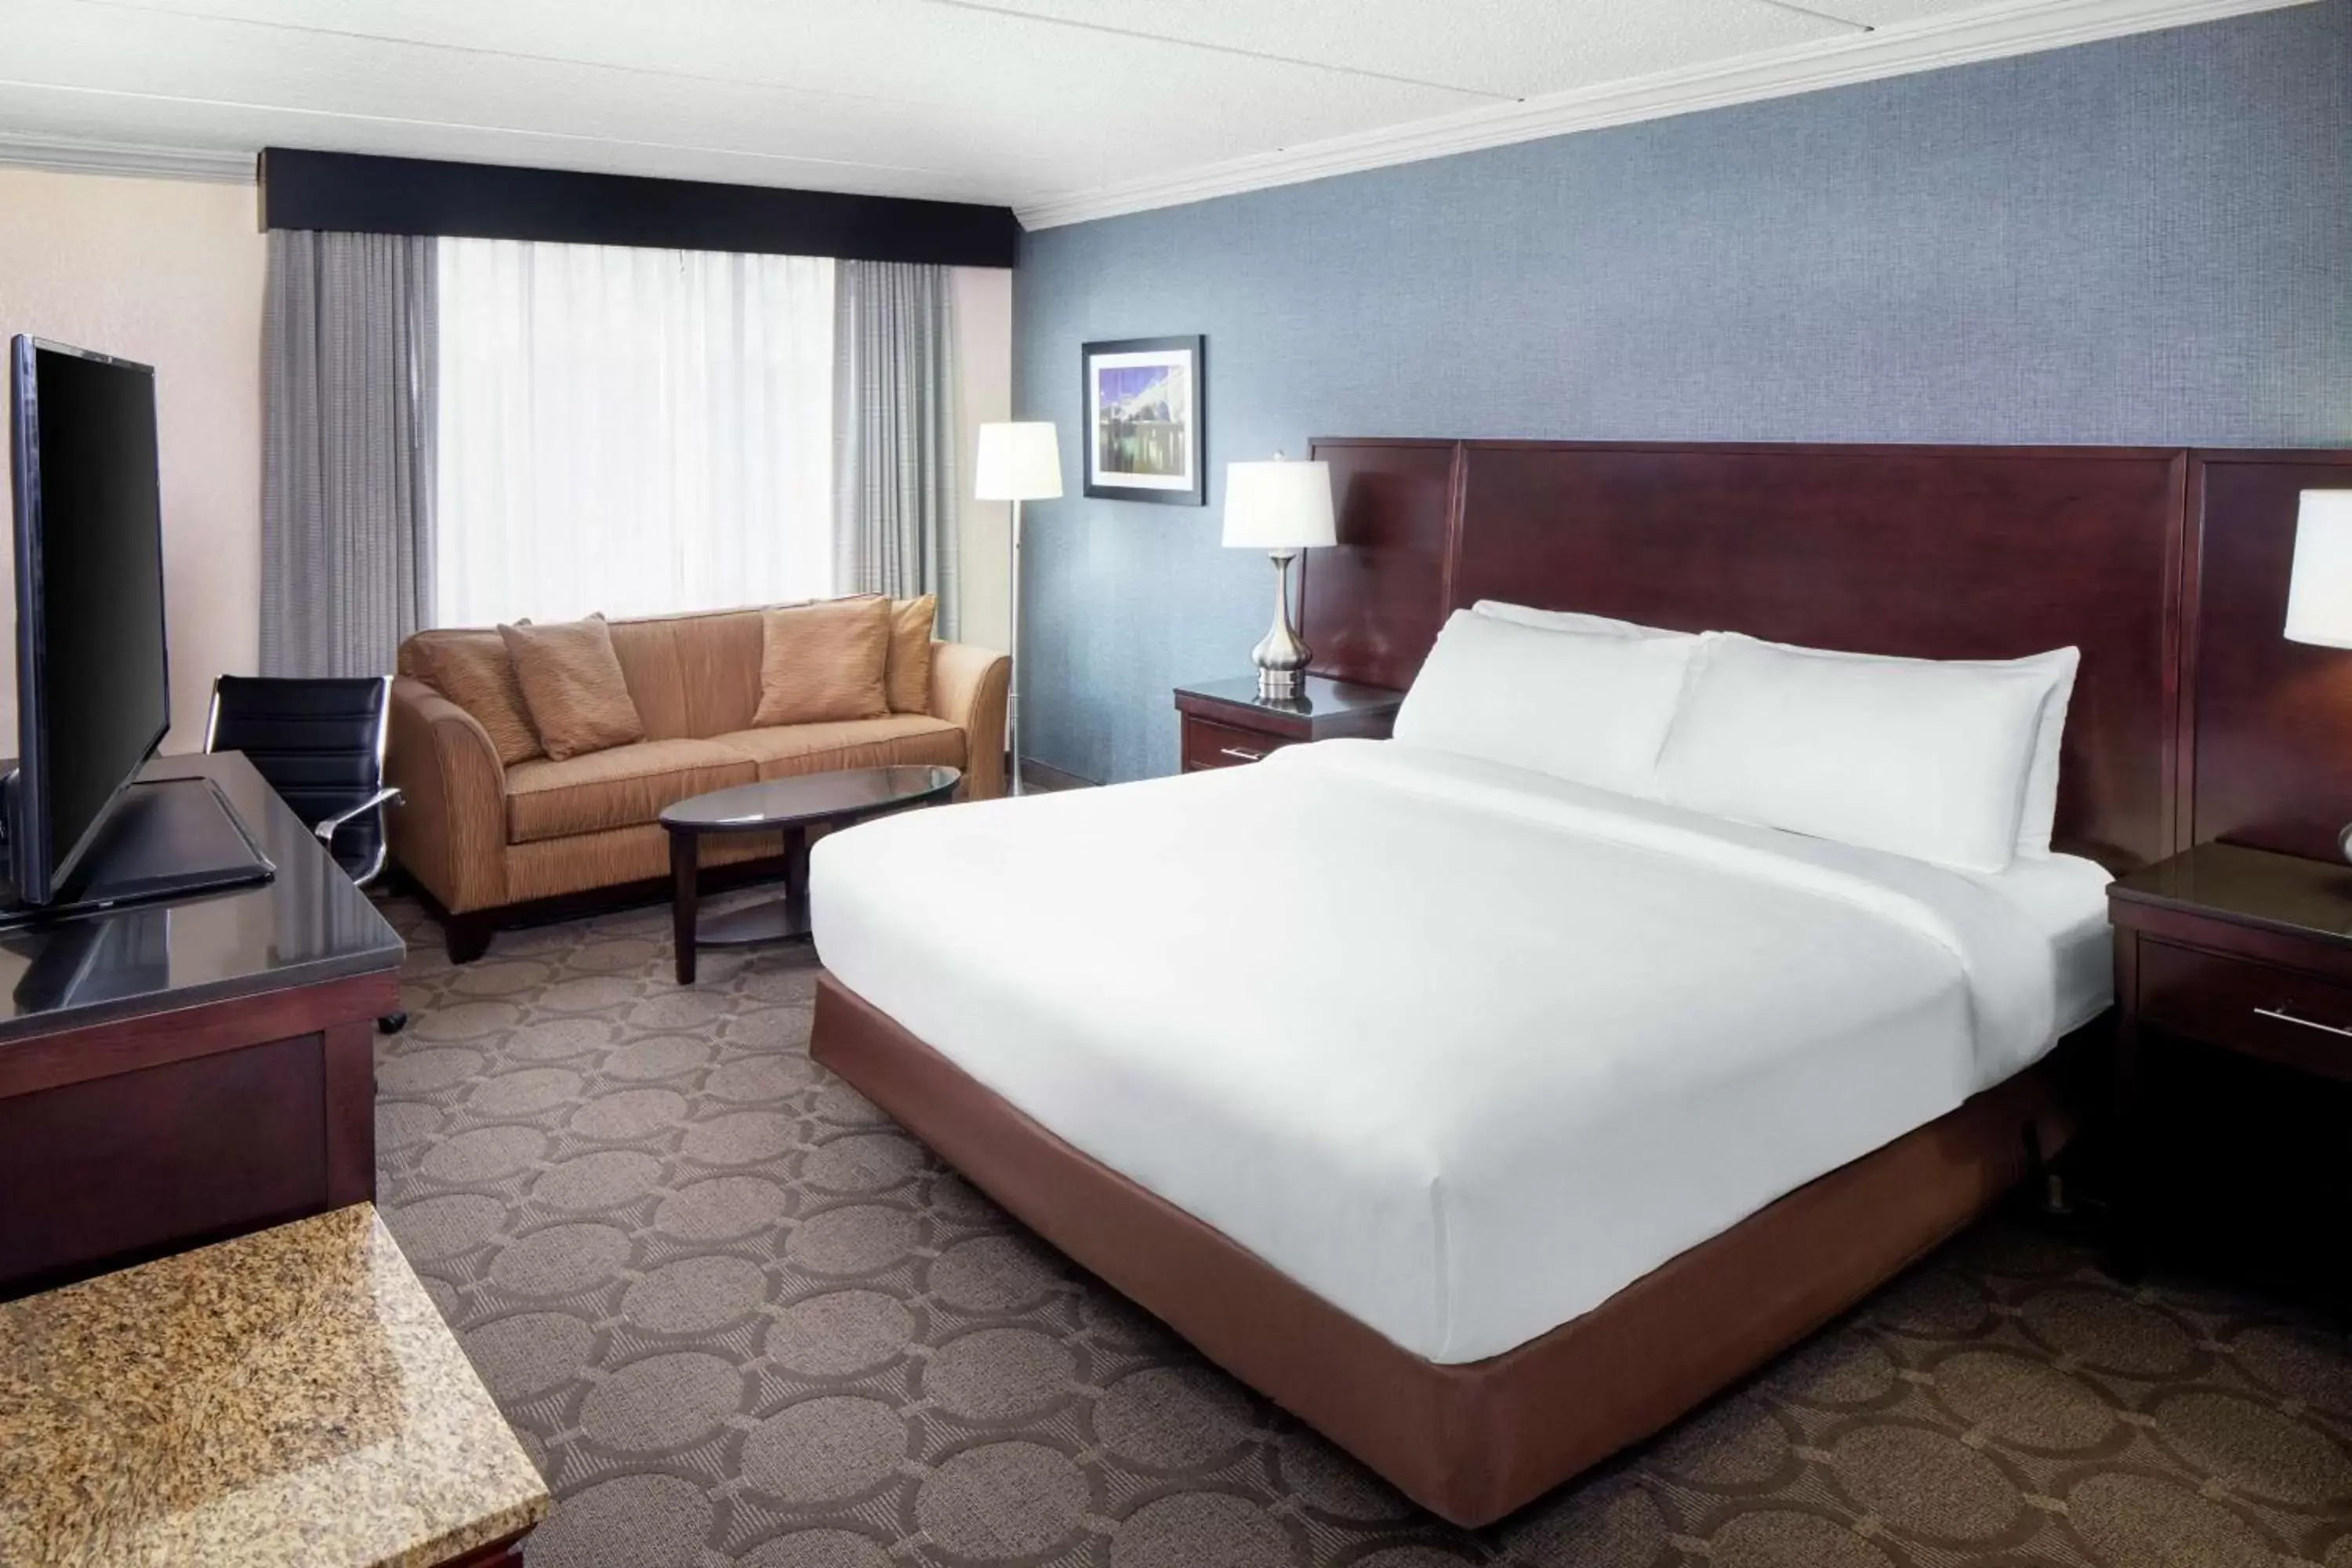 King Room in DoubleTree by Hilton Hotel Cleveland - Independence